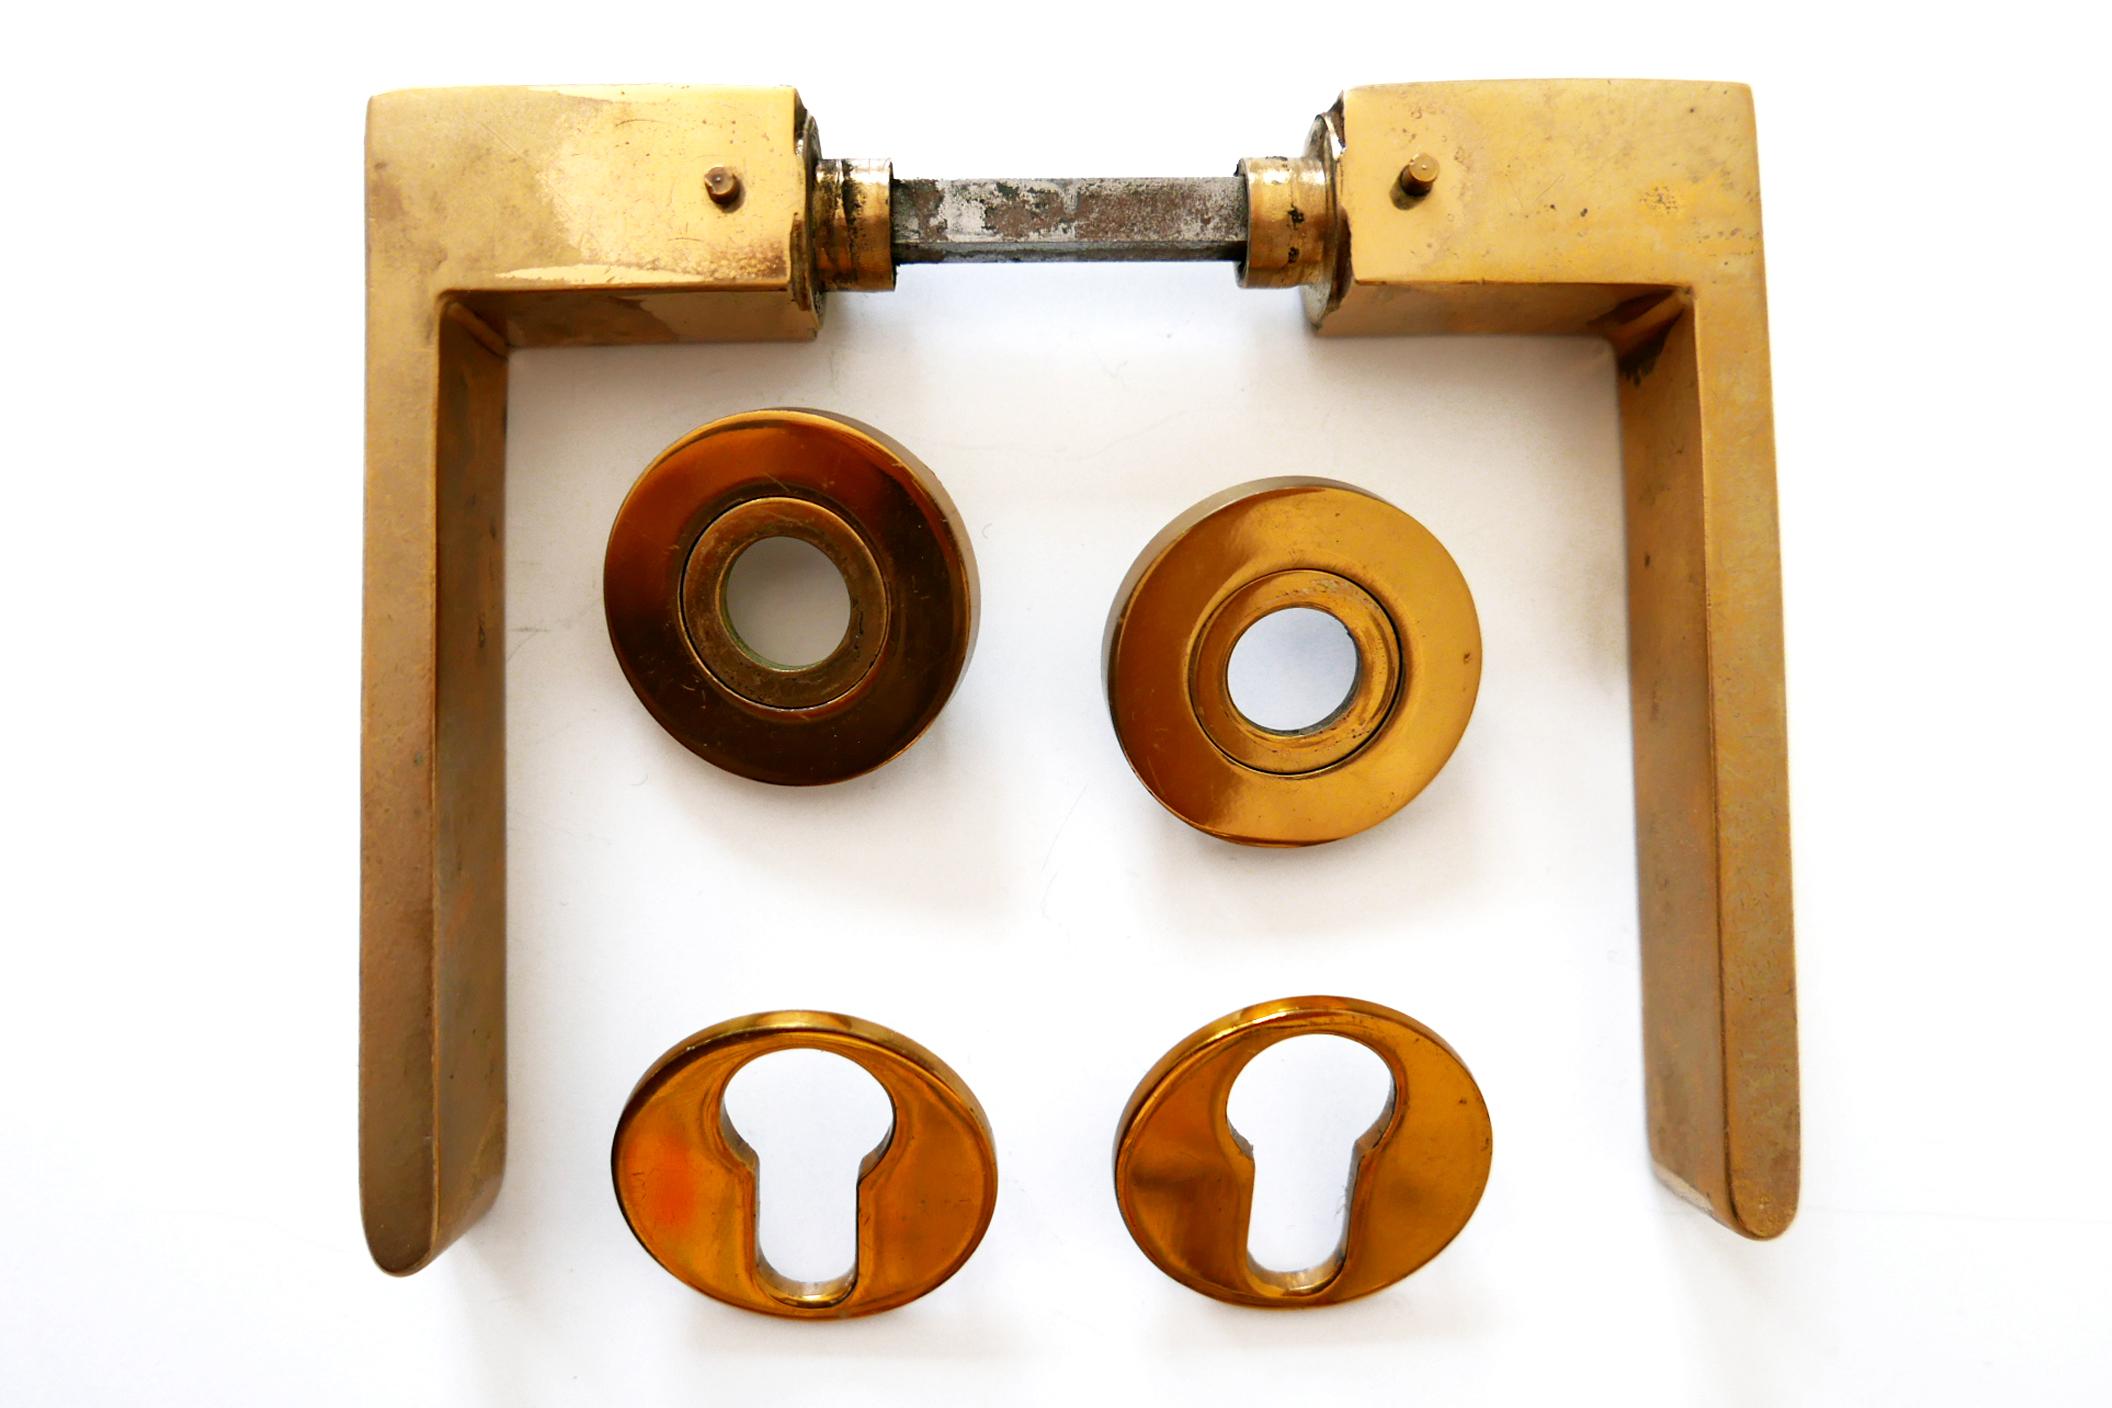 Set of six minimalistic and elegant Mid-Century Modern door handles. Designed and manufactured probably in 1950s, Germany. Executed in massive brass.

Dimensions: 0.86 x 4.72 x 5.52 in. / 2.2 x 12 x 14 cm

All six sets are complete, in very good